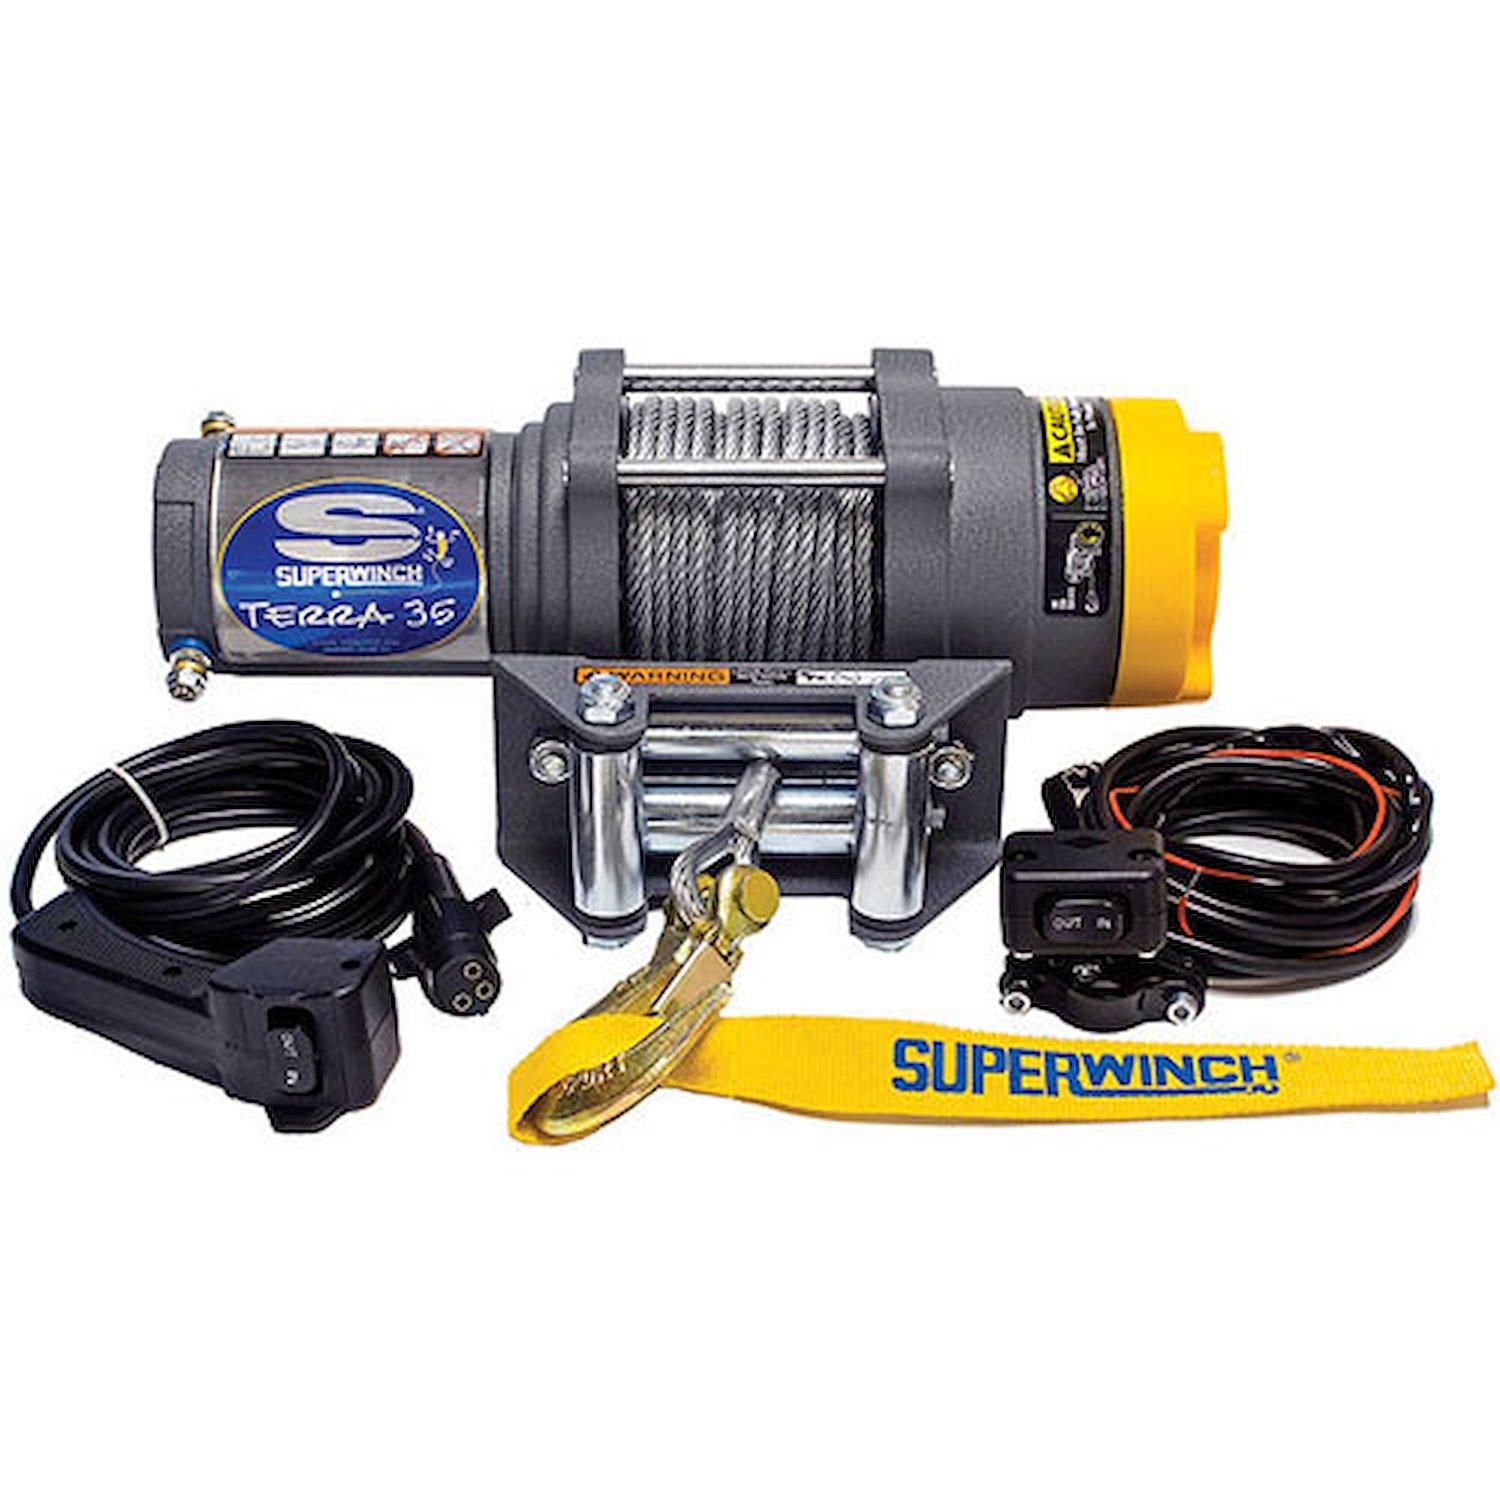 Terra 35 Winch Rated Line Pull 3,500-lb.